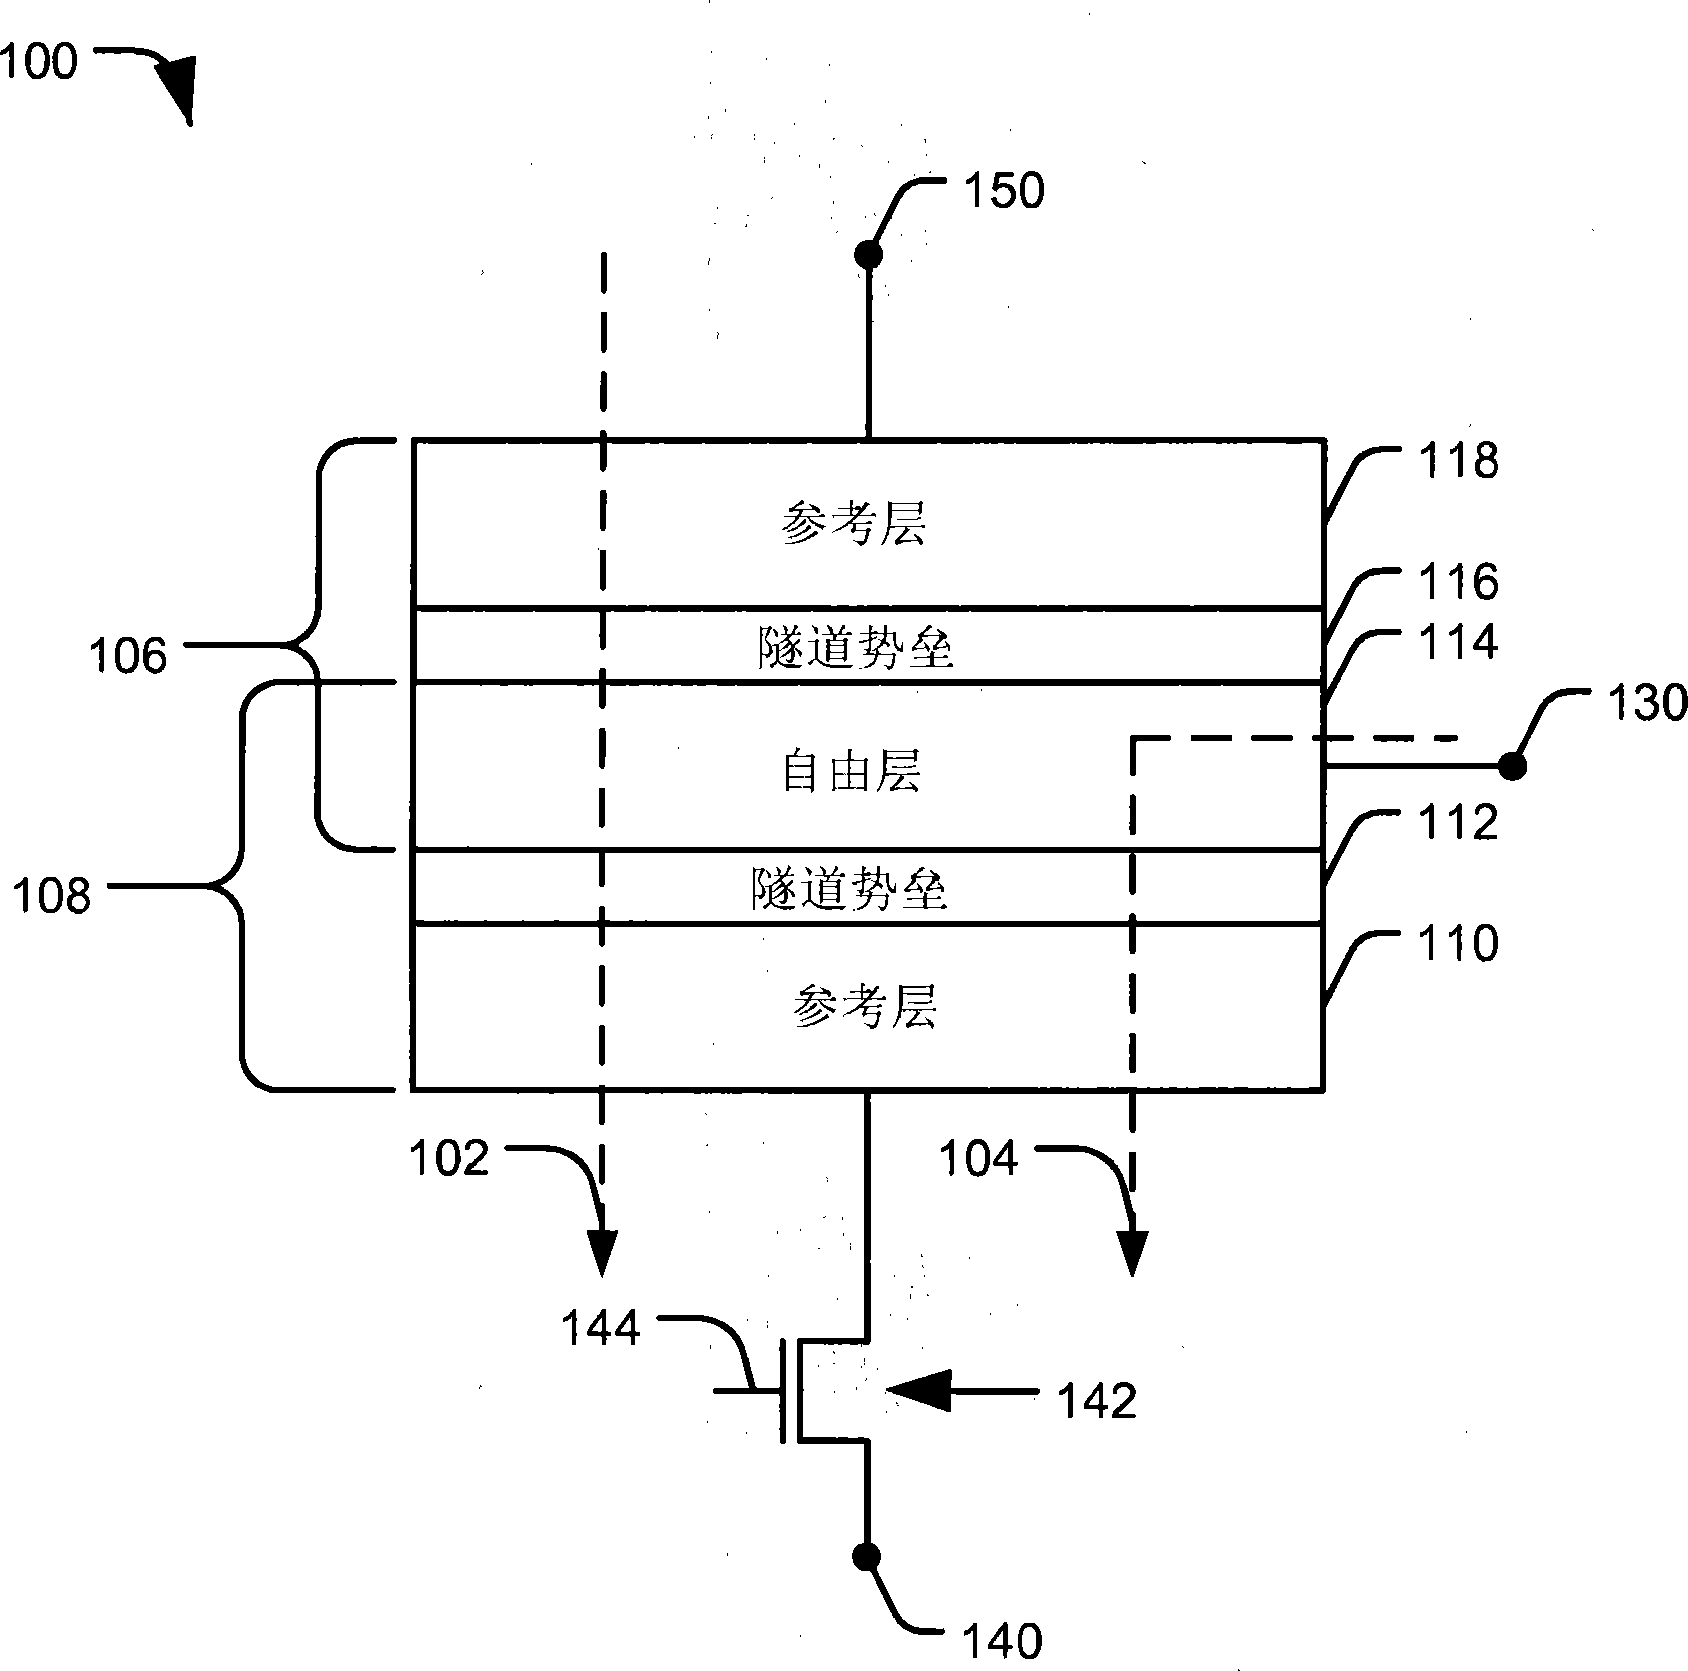 Magnetic tunnel junction device with separate read and write paths